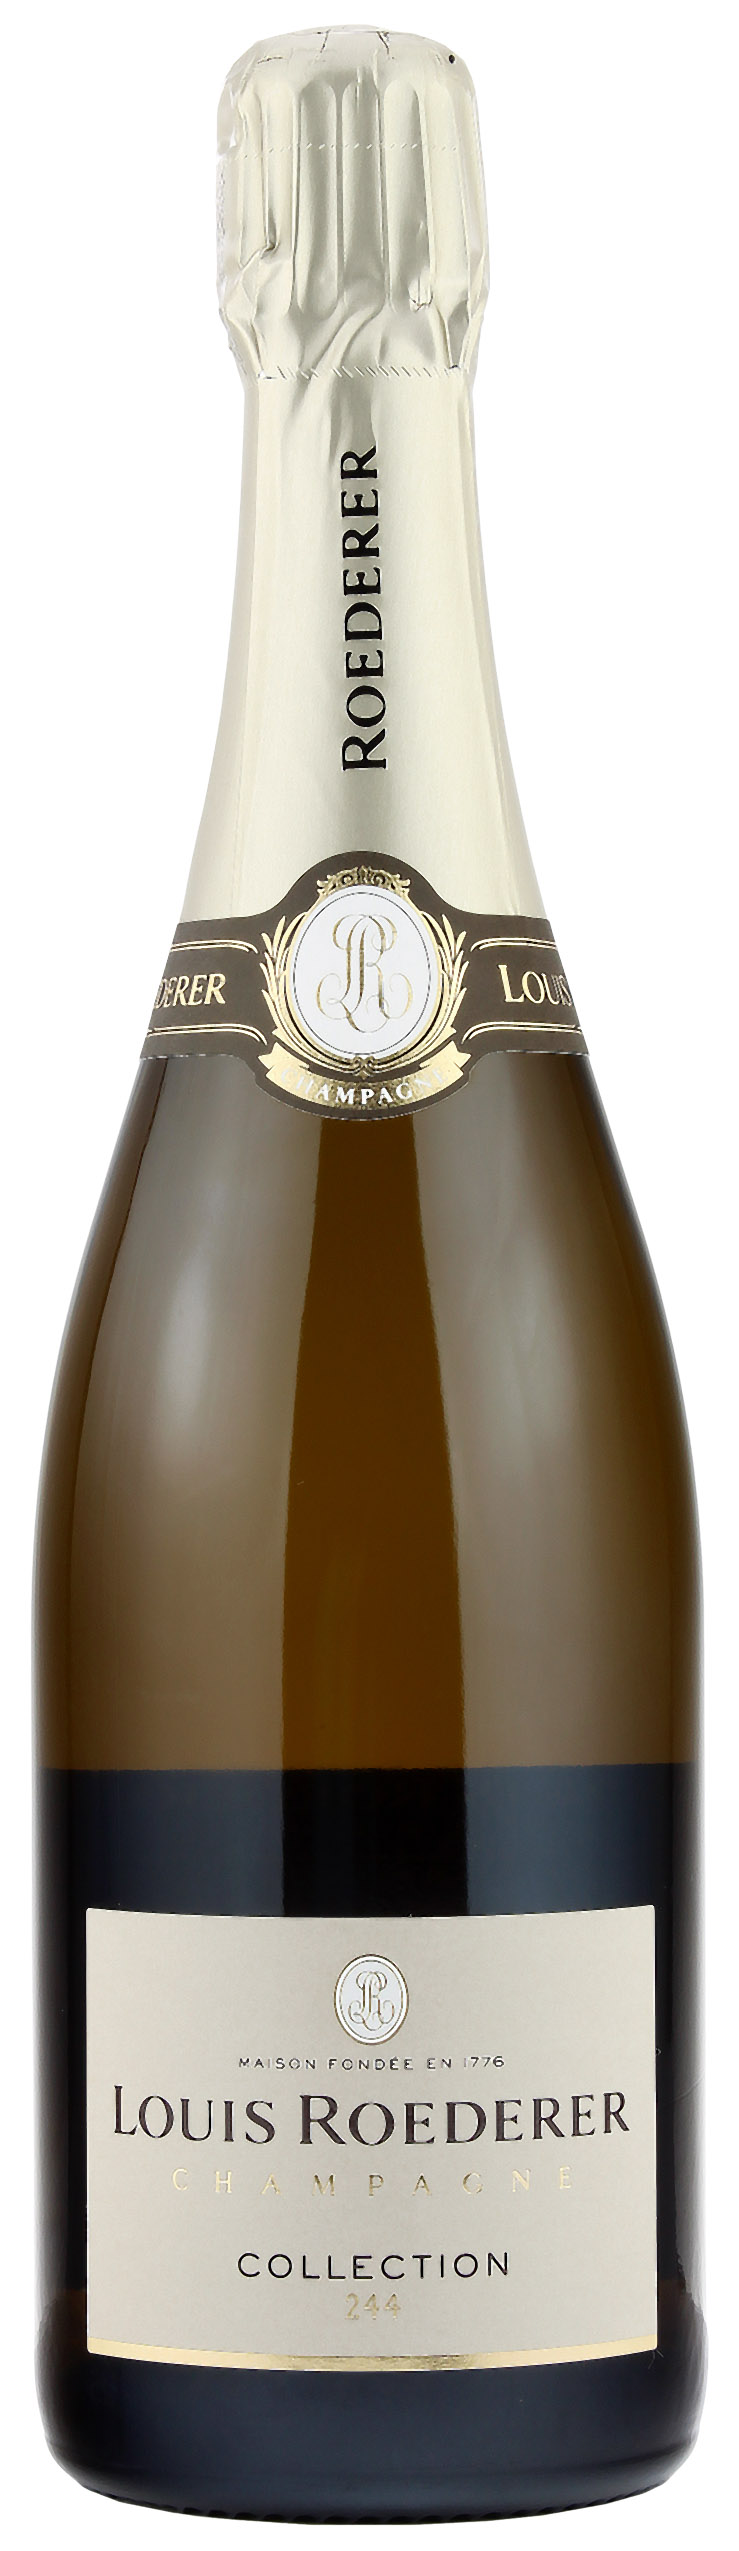 Louis Roederer Collection 244 Champagner 12.5% 0,75l